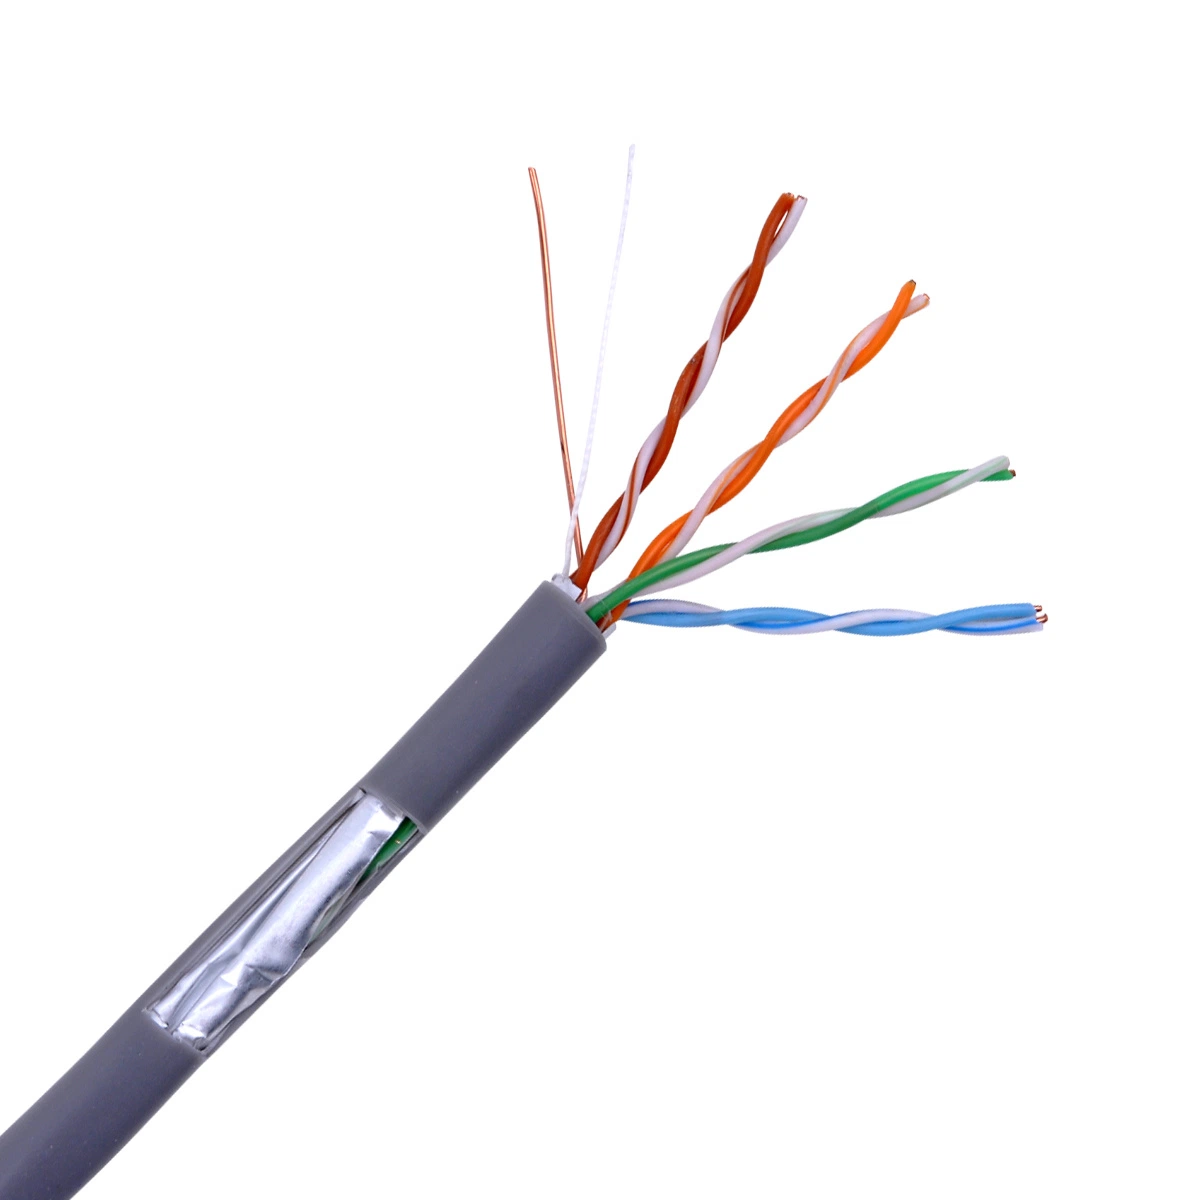 UTP FTP SFTP LSZH Lsoh Data Cat5 Cat5e CAT6 CAT6A Cat7 Ethernet Networking LAN Ethernet Network Cable with Structured Cabling Communication Computer